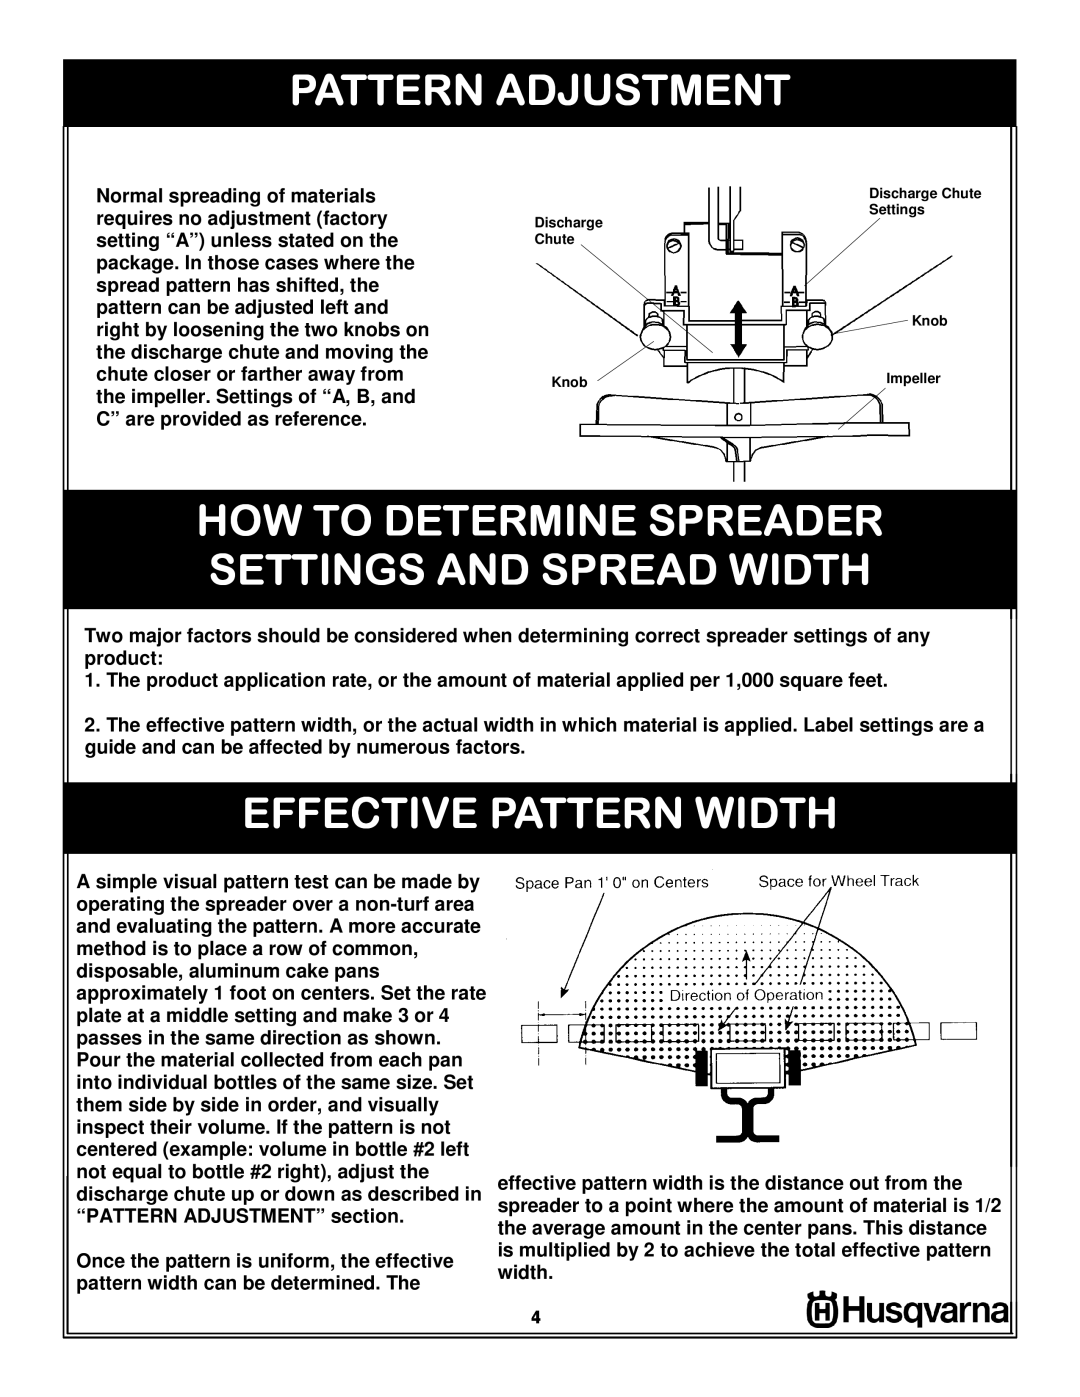 Husqvarna 966043501 Pattern Adjustment, How To Determine Spreader Settings And Spread Width, Effective Pattern Width, Knob 